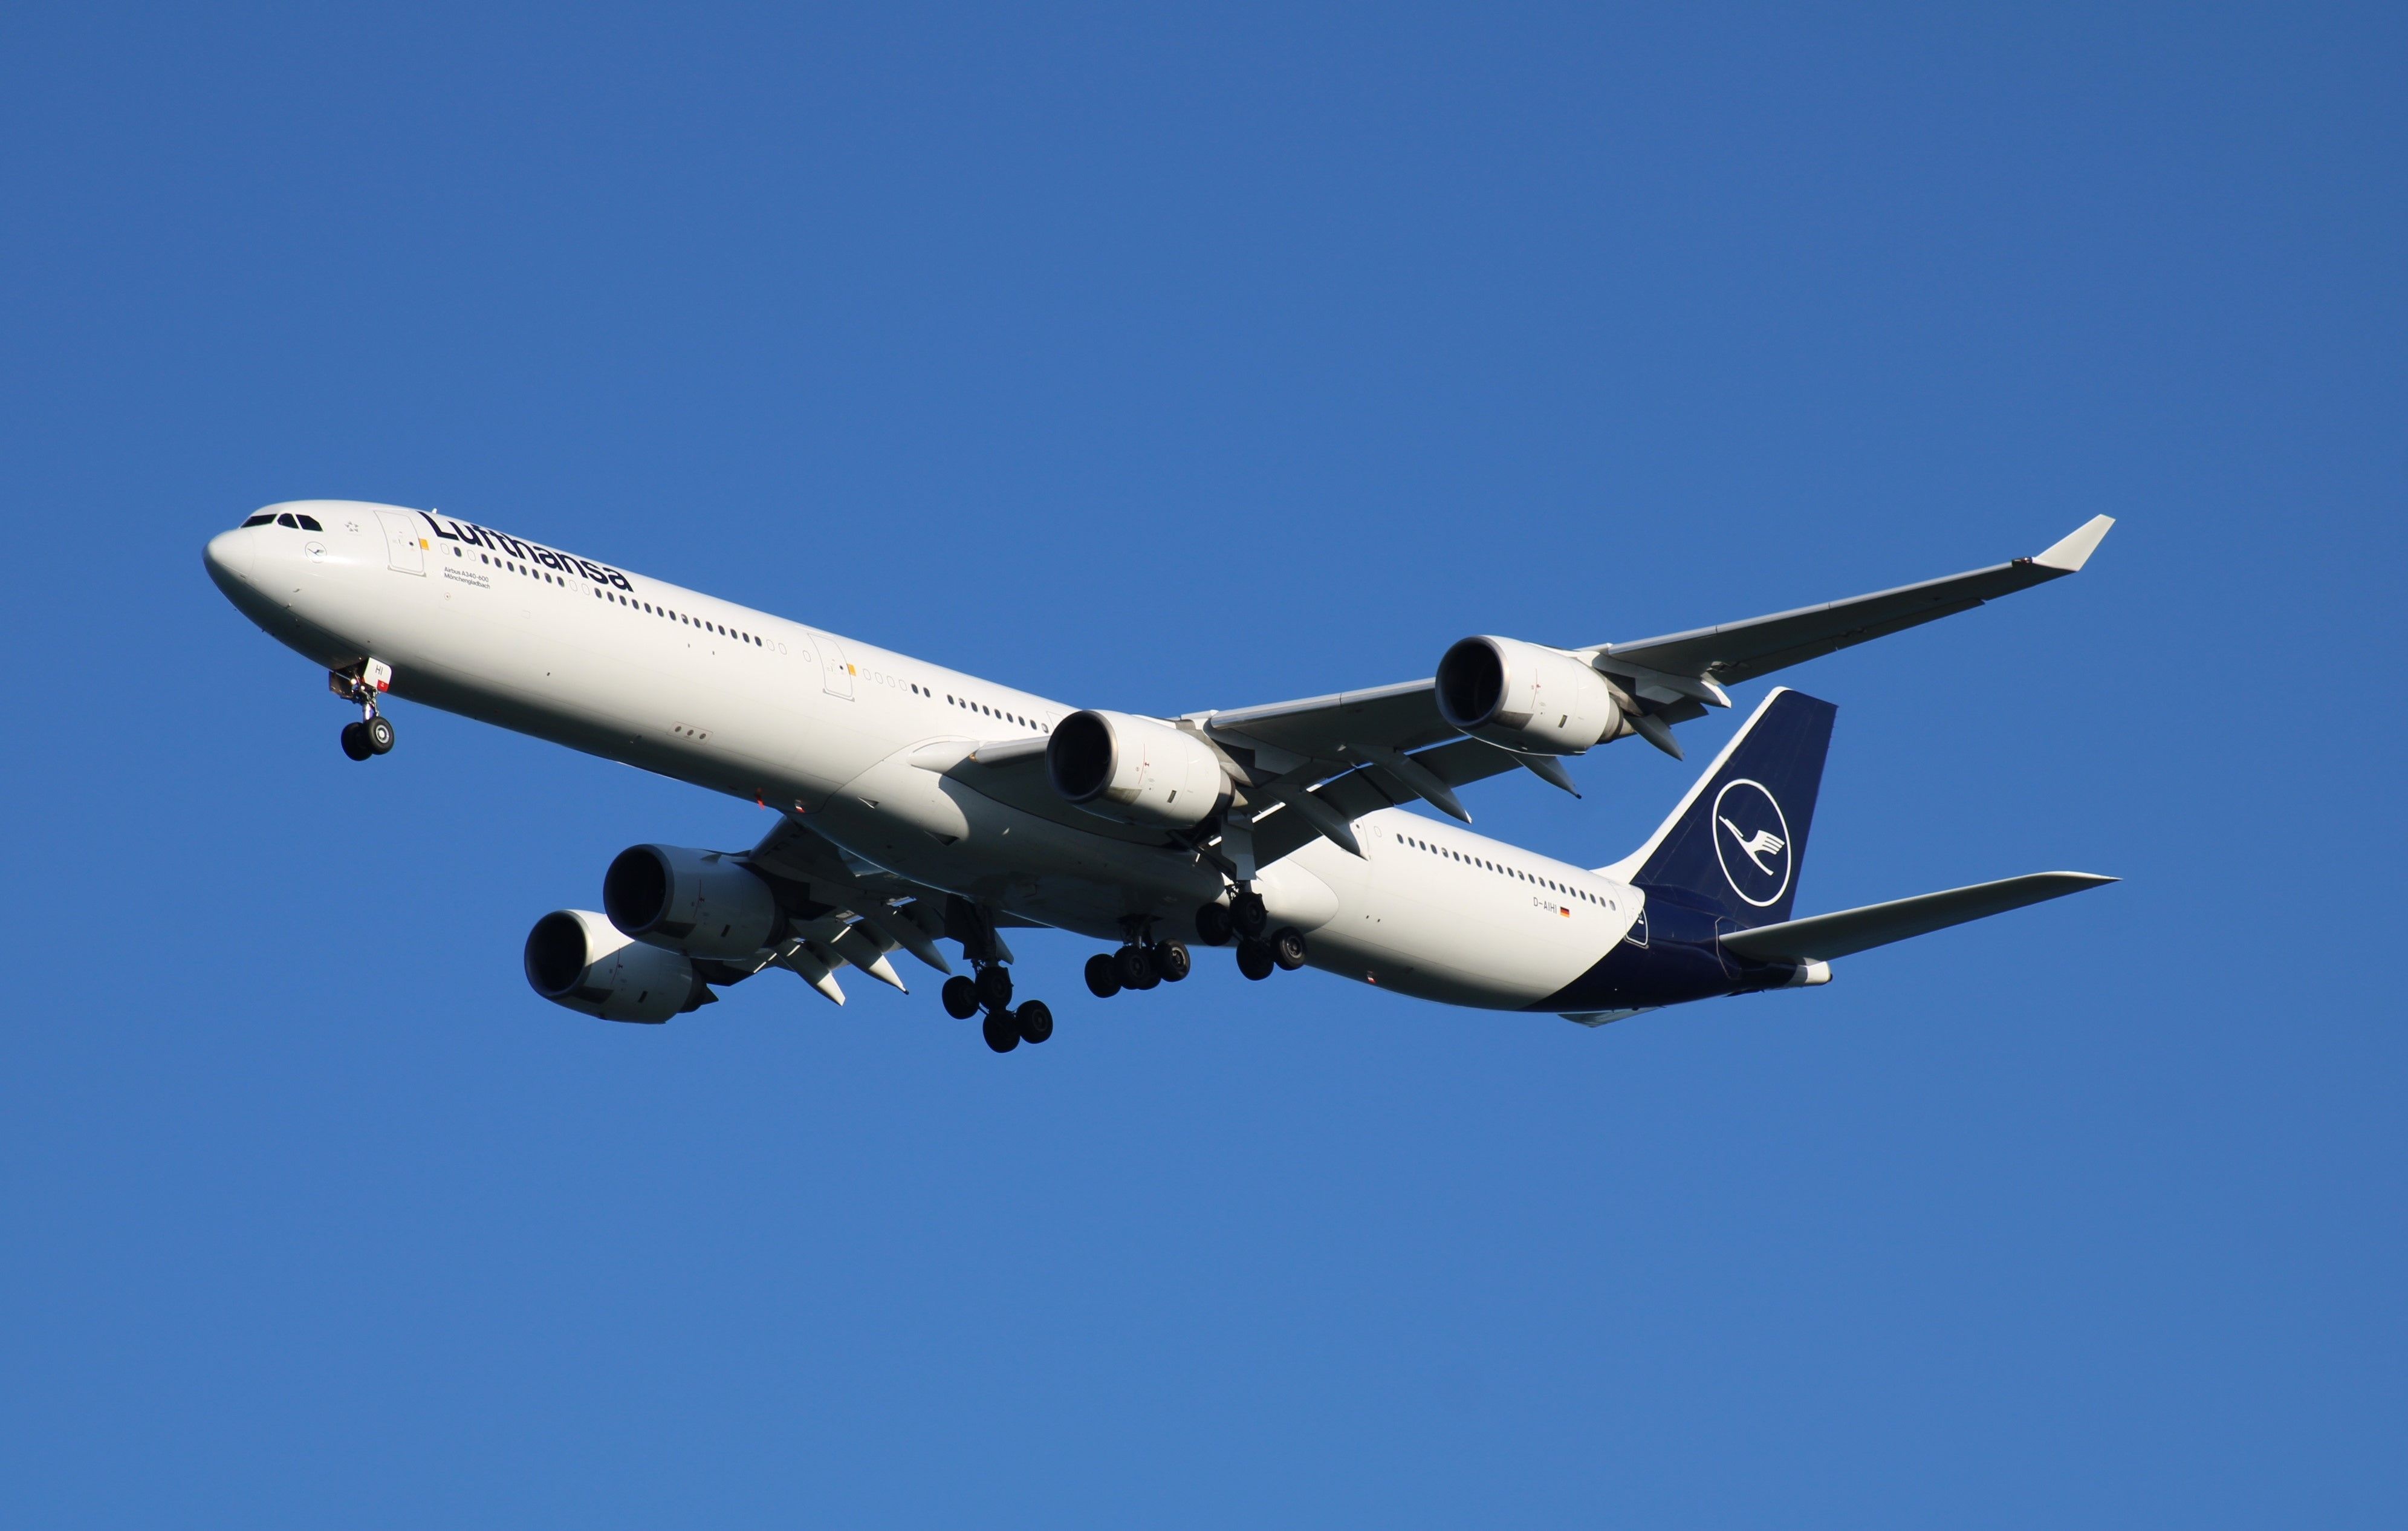 A Lufthansa Airbus A340-600 flying in the sky.